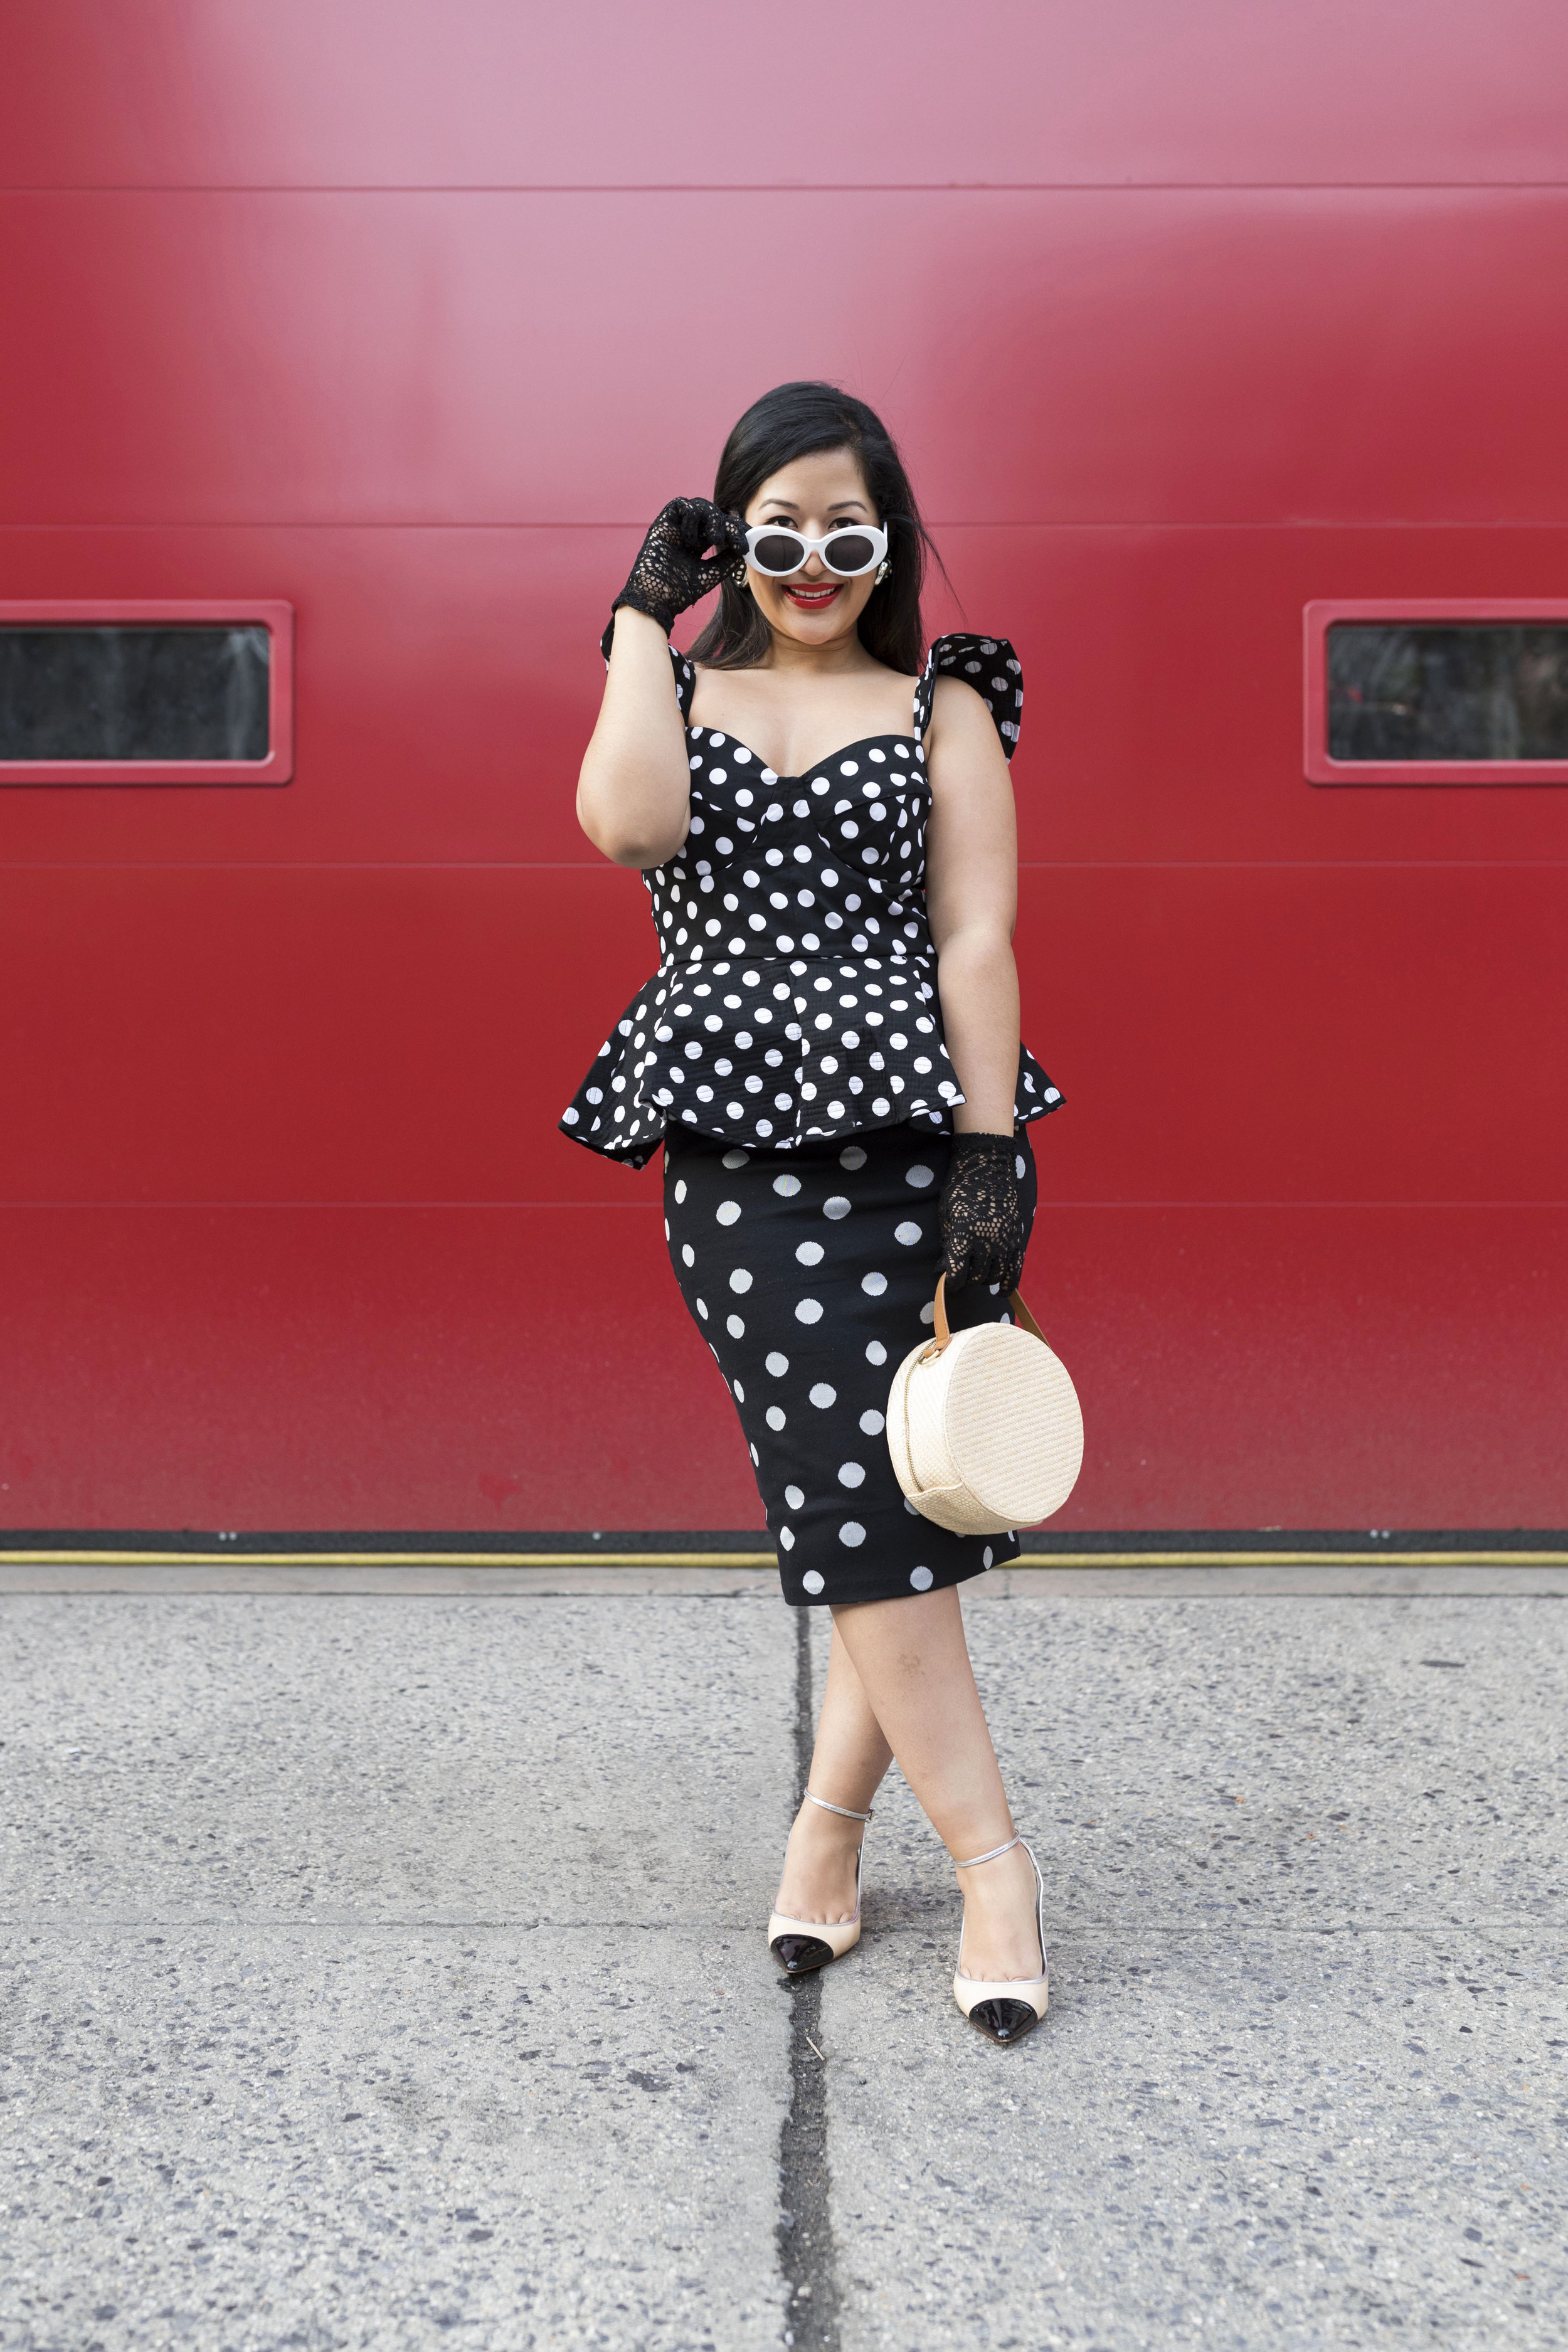 Krity S x Polka Dots x Spring Outfit3.jpg